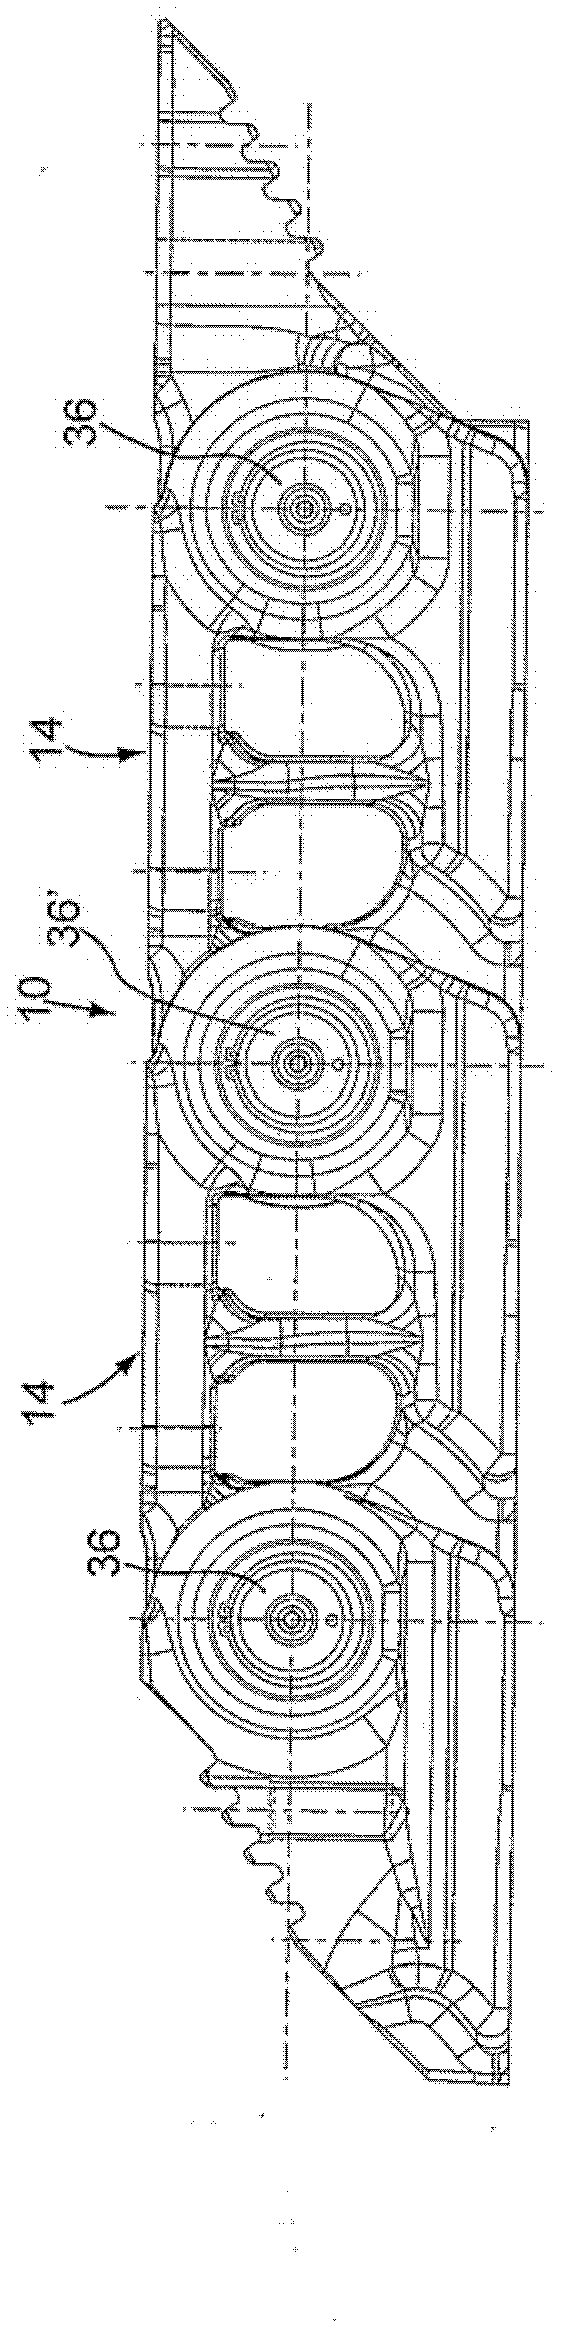 Track with rotating bushings for track-type vehicles